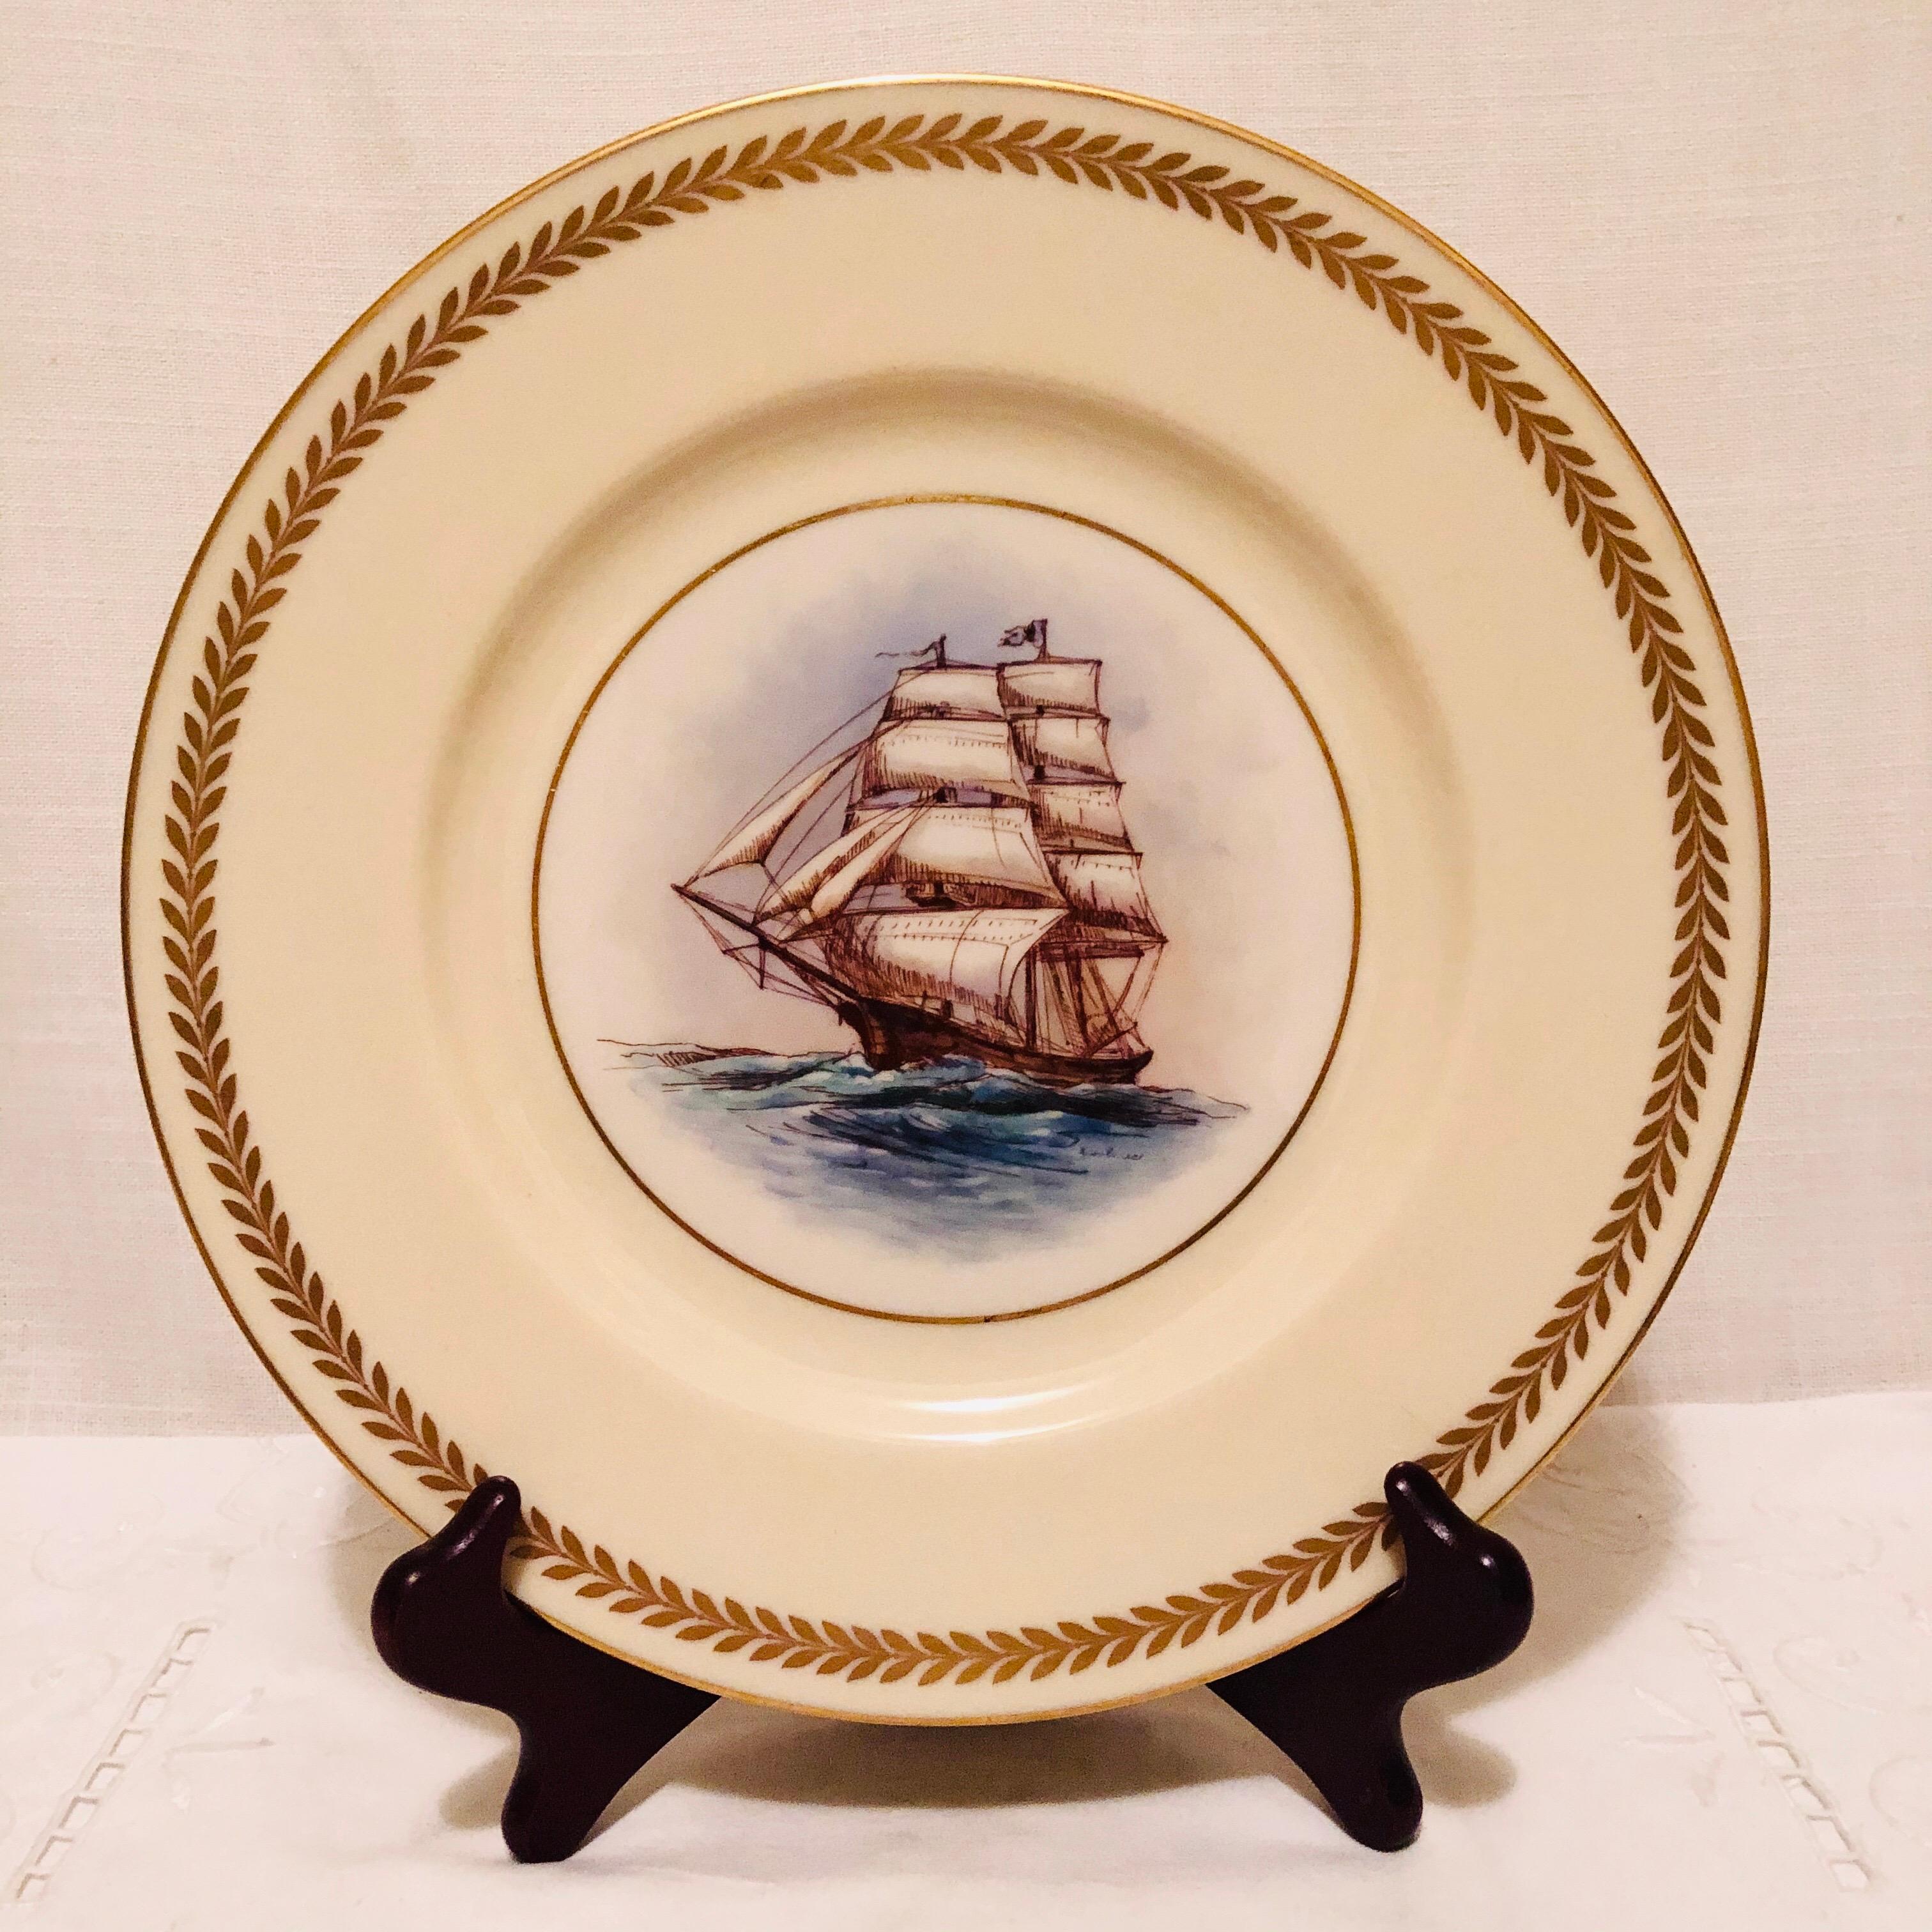 Early 20th Century Set of Twelve Lenox Plates Each Hand Painted with a Different Tall Ship